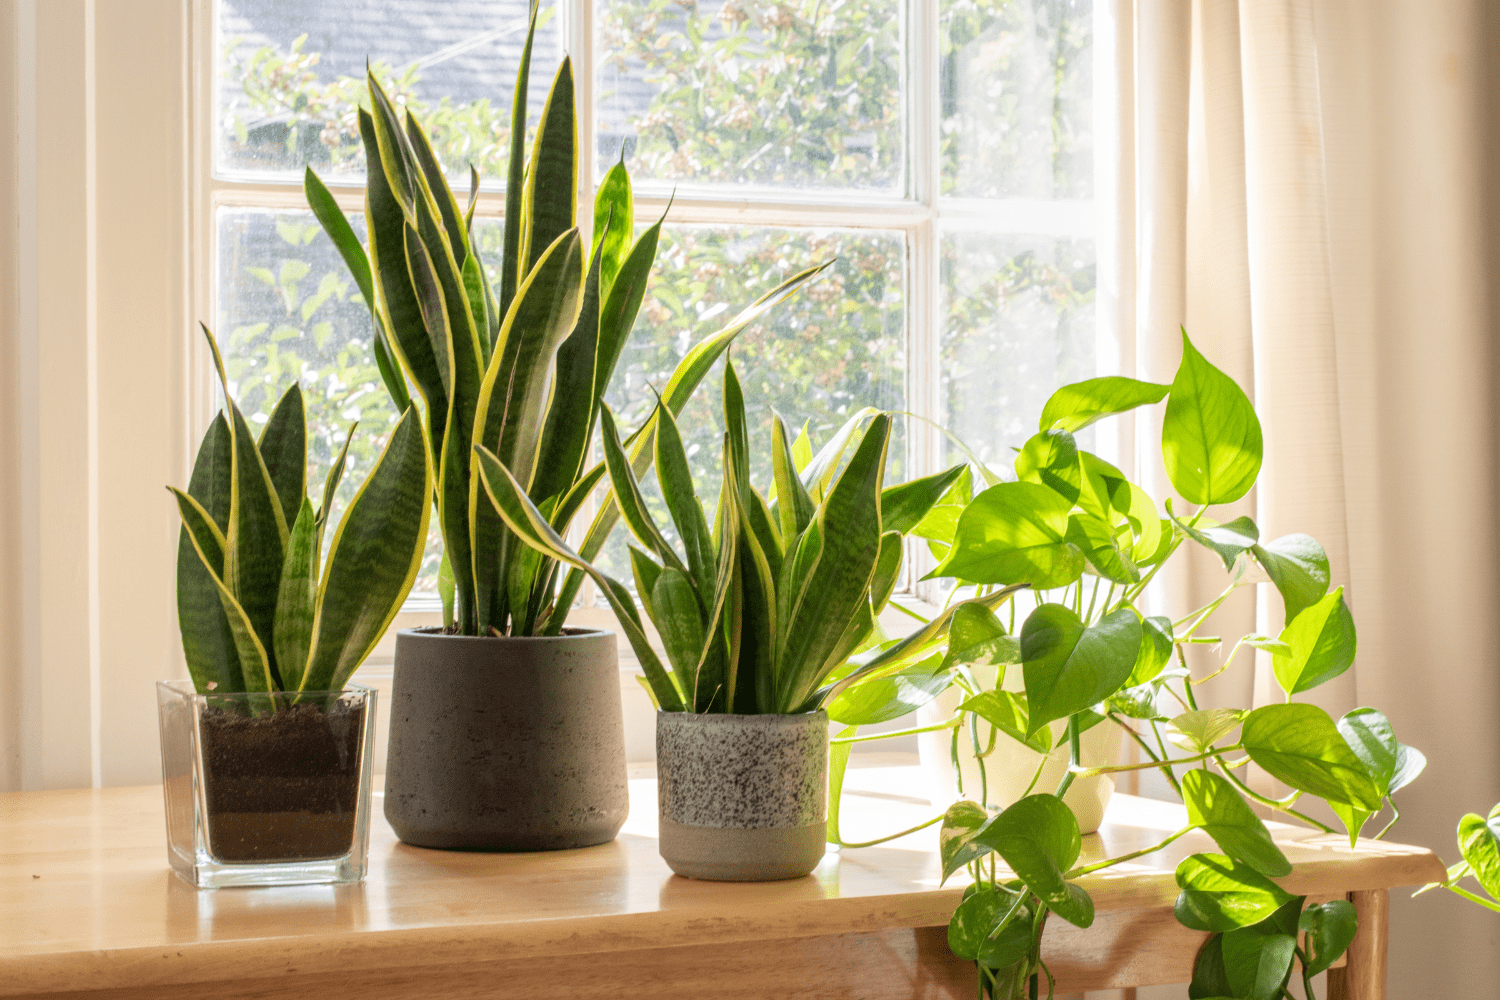 Selecting the Finest Plants, Including the Pet-Friendly Ones, for Your Indoor Garden